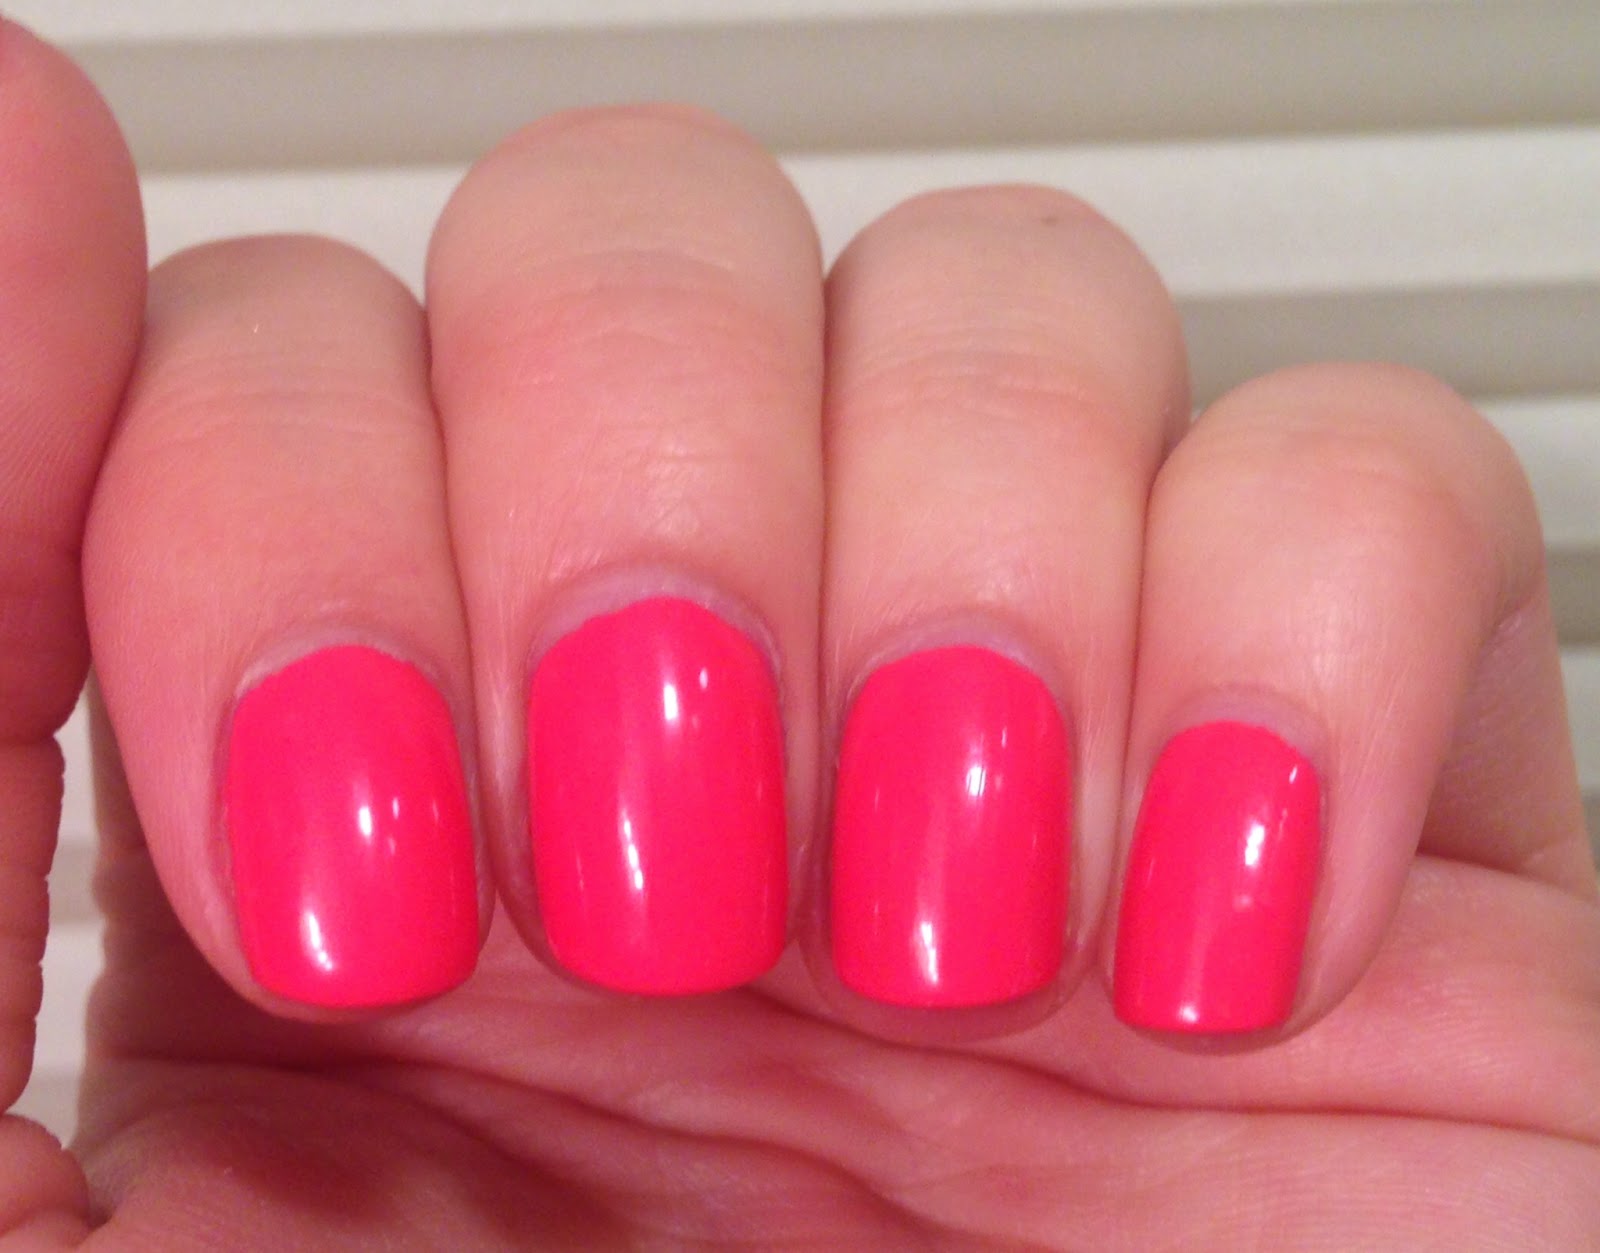 7. OPI Infinite Shine in "Peachy Parfait" - wide 9